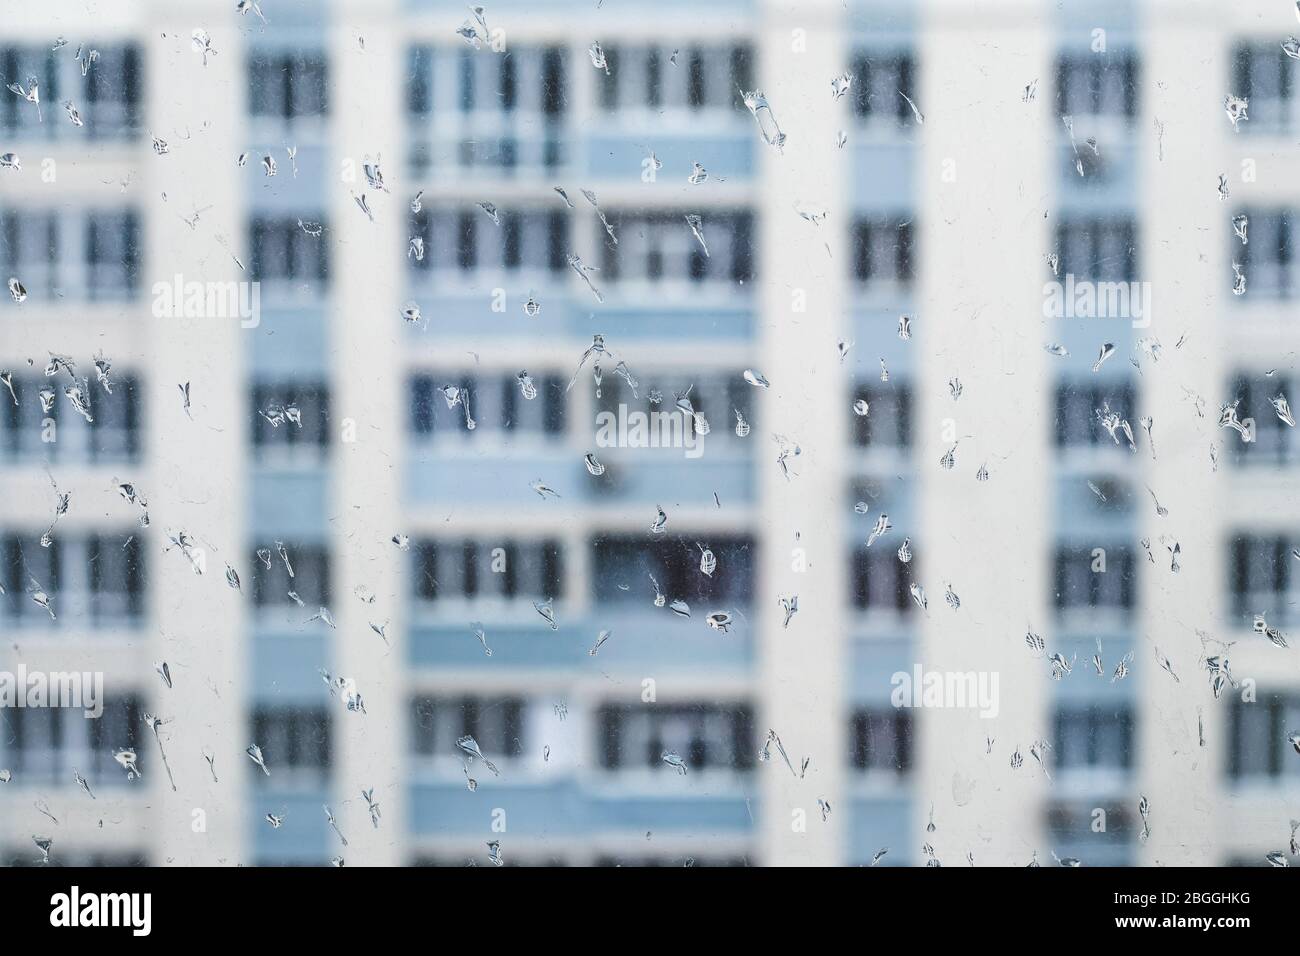 Dirty rainy window overlooking residential buildings, water drops on a glass. Self isolation concept, loneliness, sad mood Stock Photo